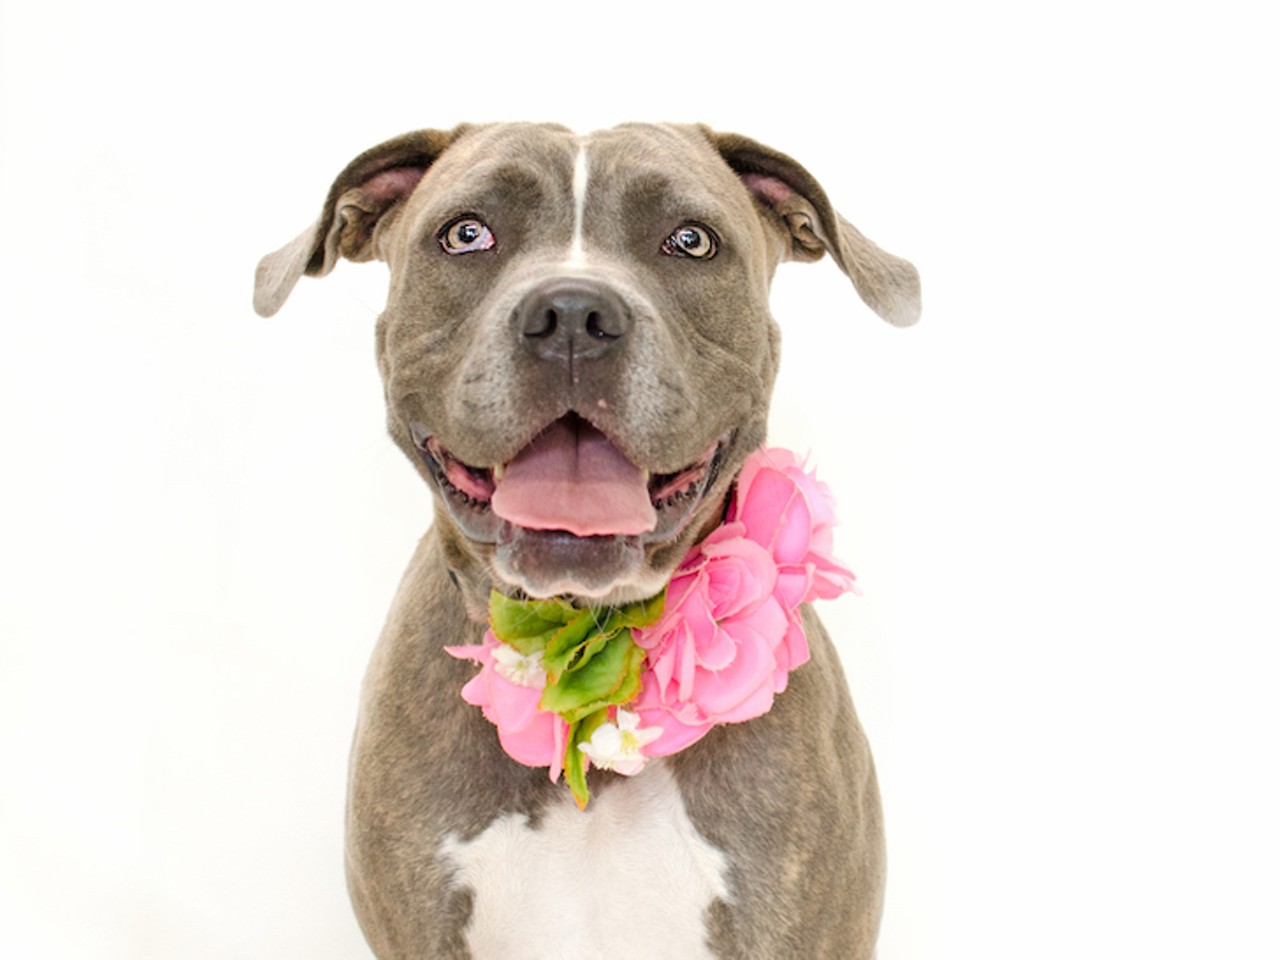 19 fun-loving shelter dogs that would be super happy to meet you